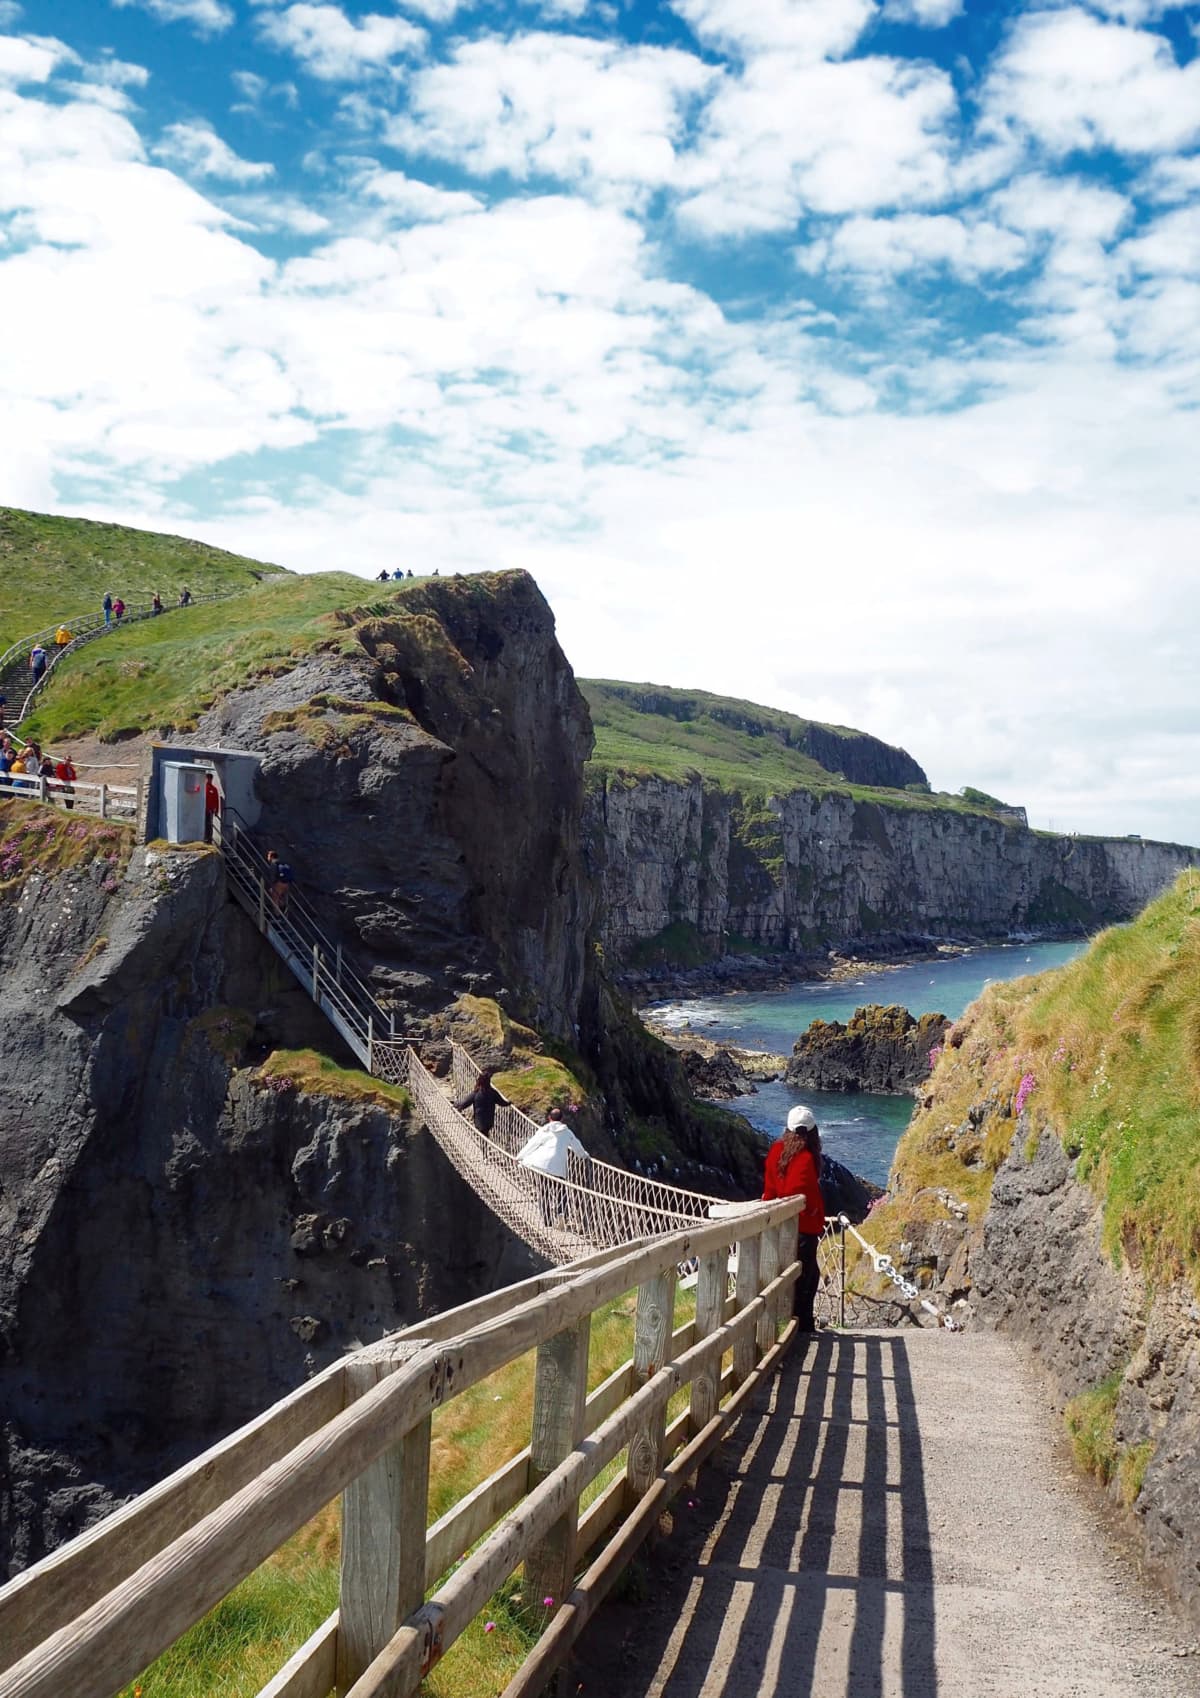 Carrick-a-Rede Rope Bridge in Northern Ireland